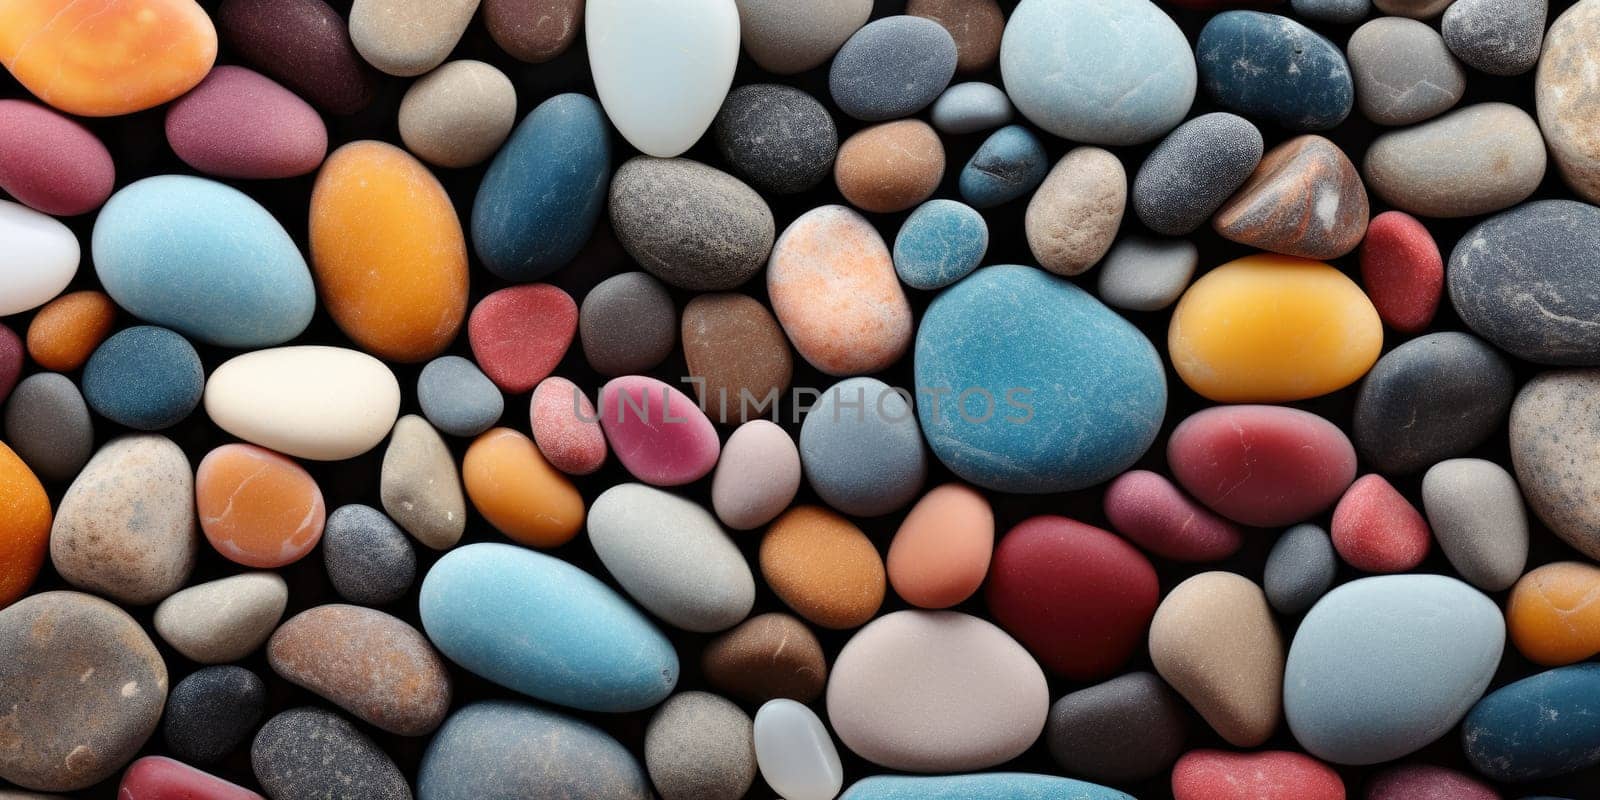 Colorful pebbles stones as texture or background by Kadula